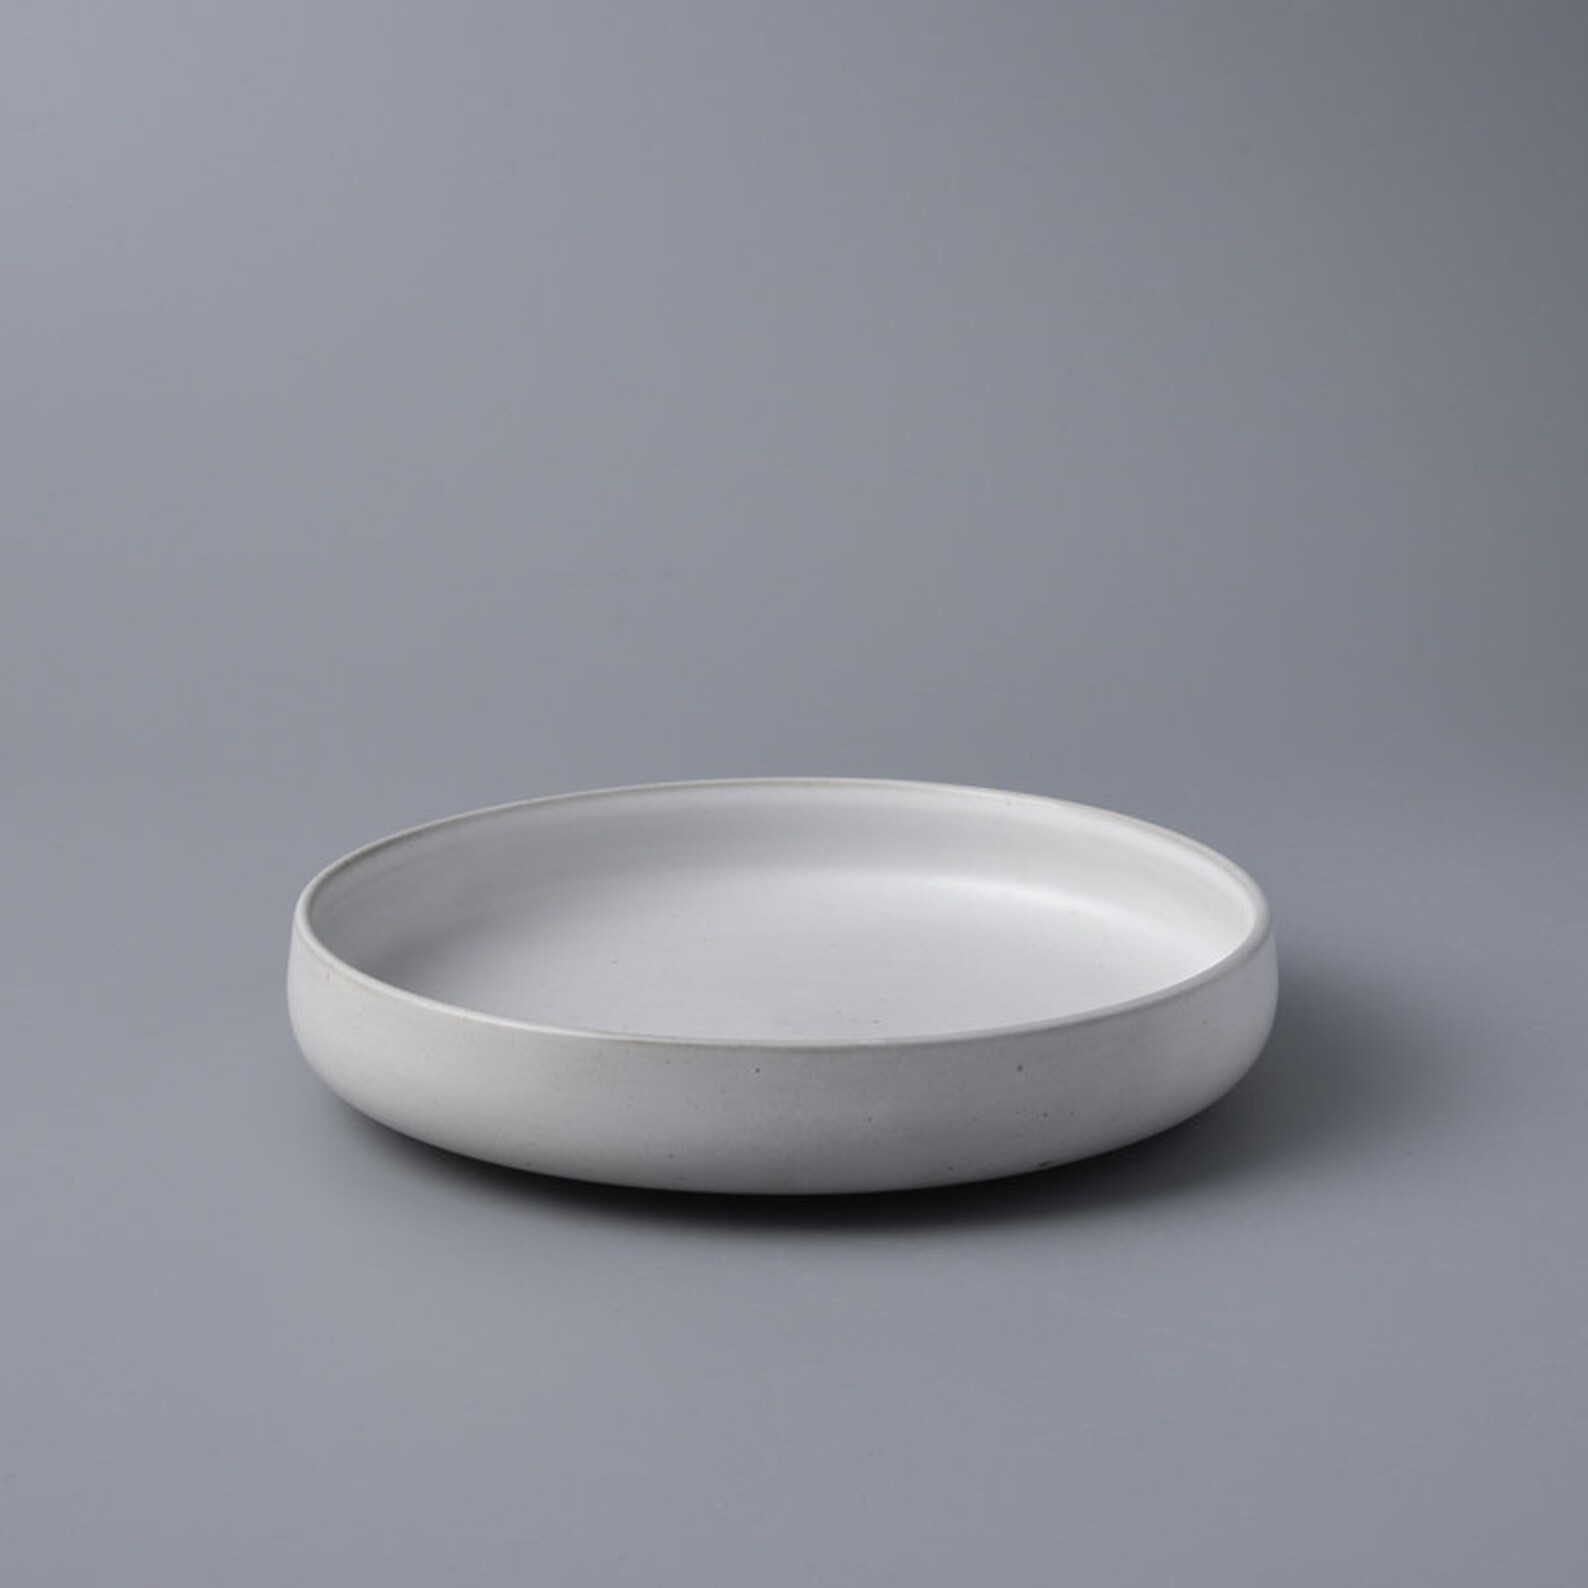 Upgrade your mealtime with this gorgeous kitchenware: Pasta bowl | Sunnys Shop LA